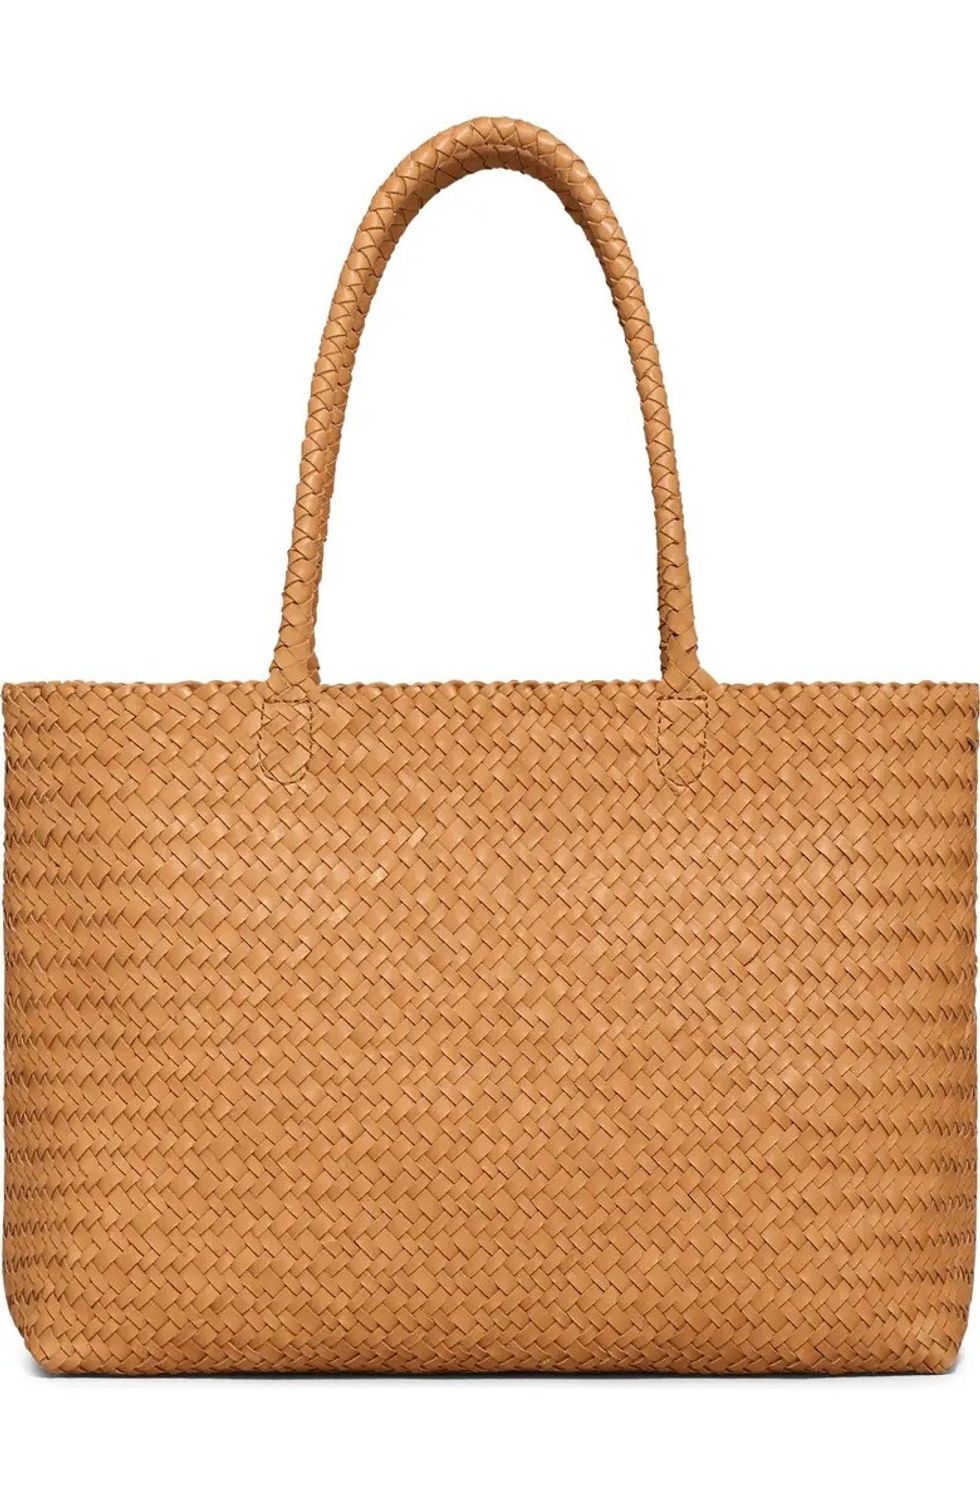 Madewell Handwoven Leather Tote work bag